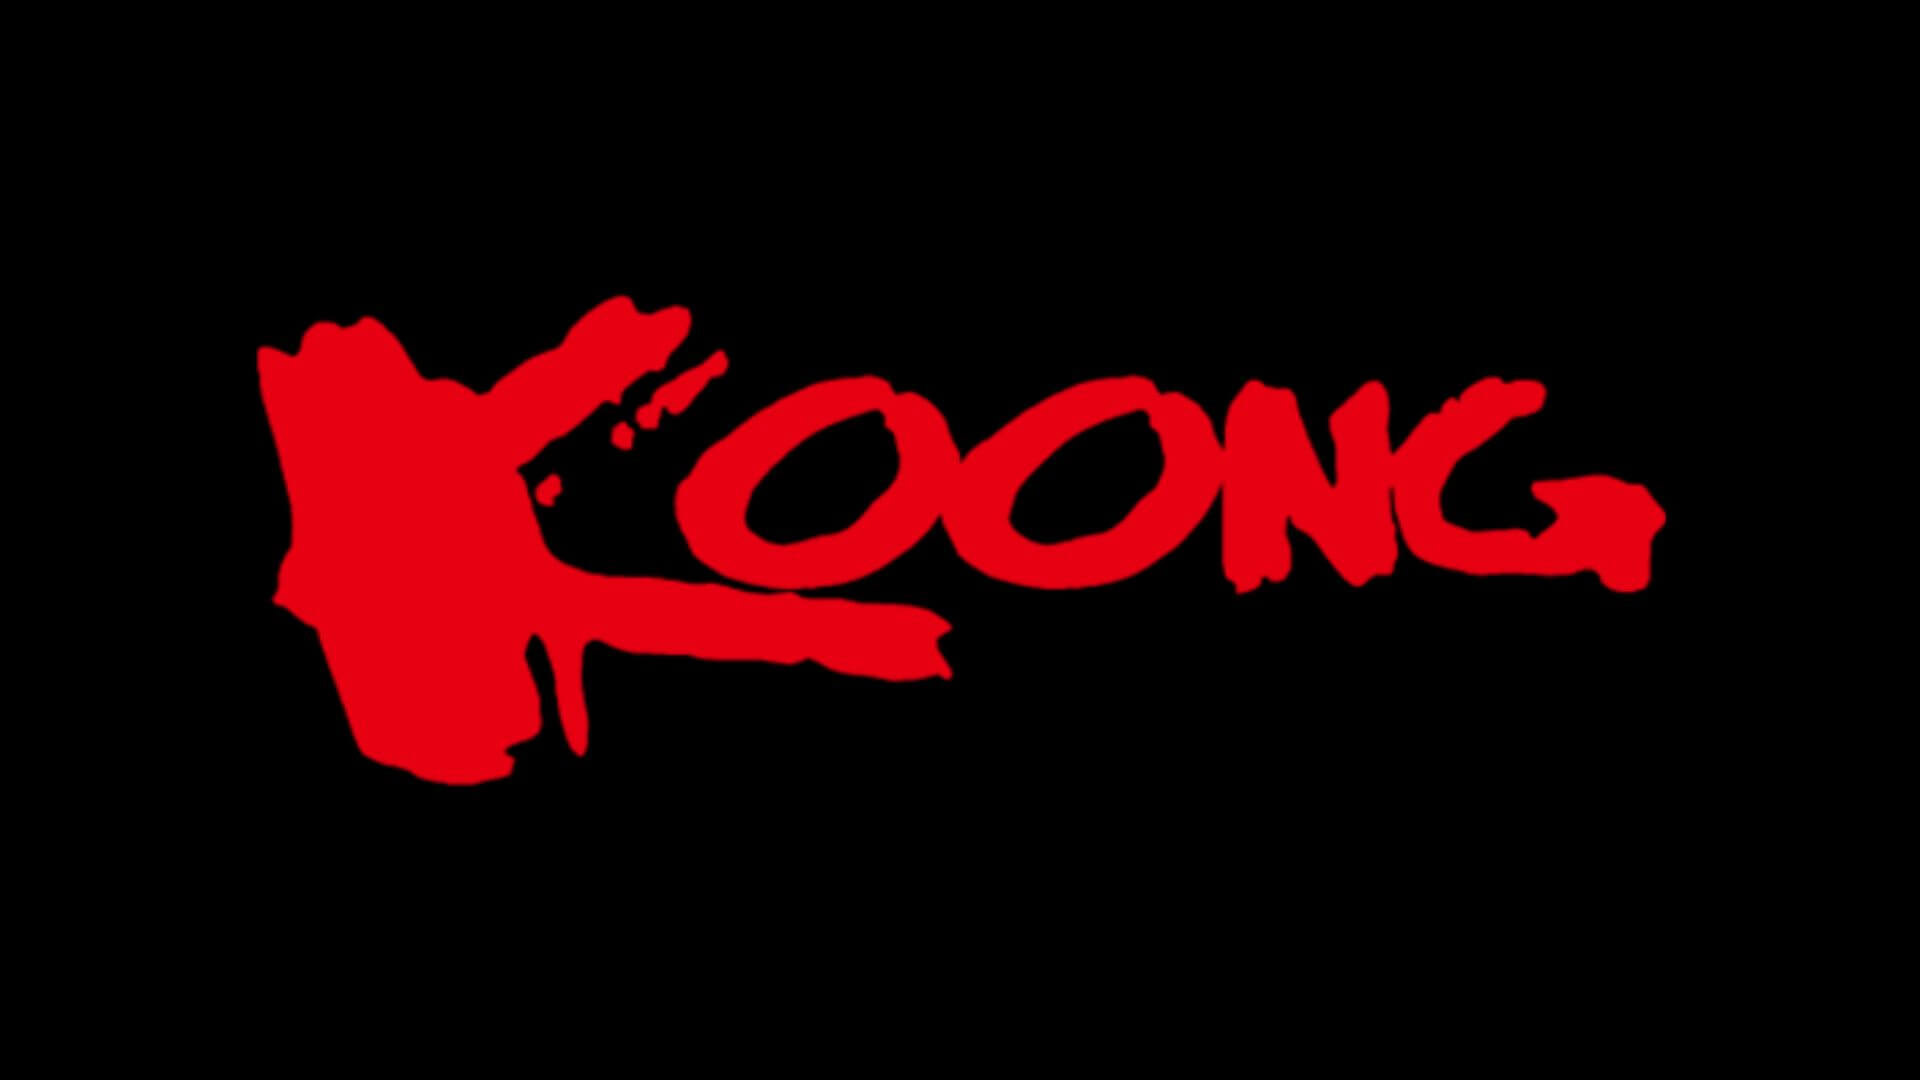 KOONG Makes Its Advancement to Global Market with Its First-Class NFT Technology